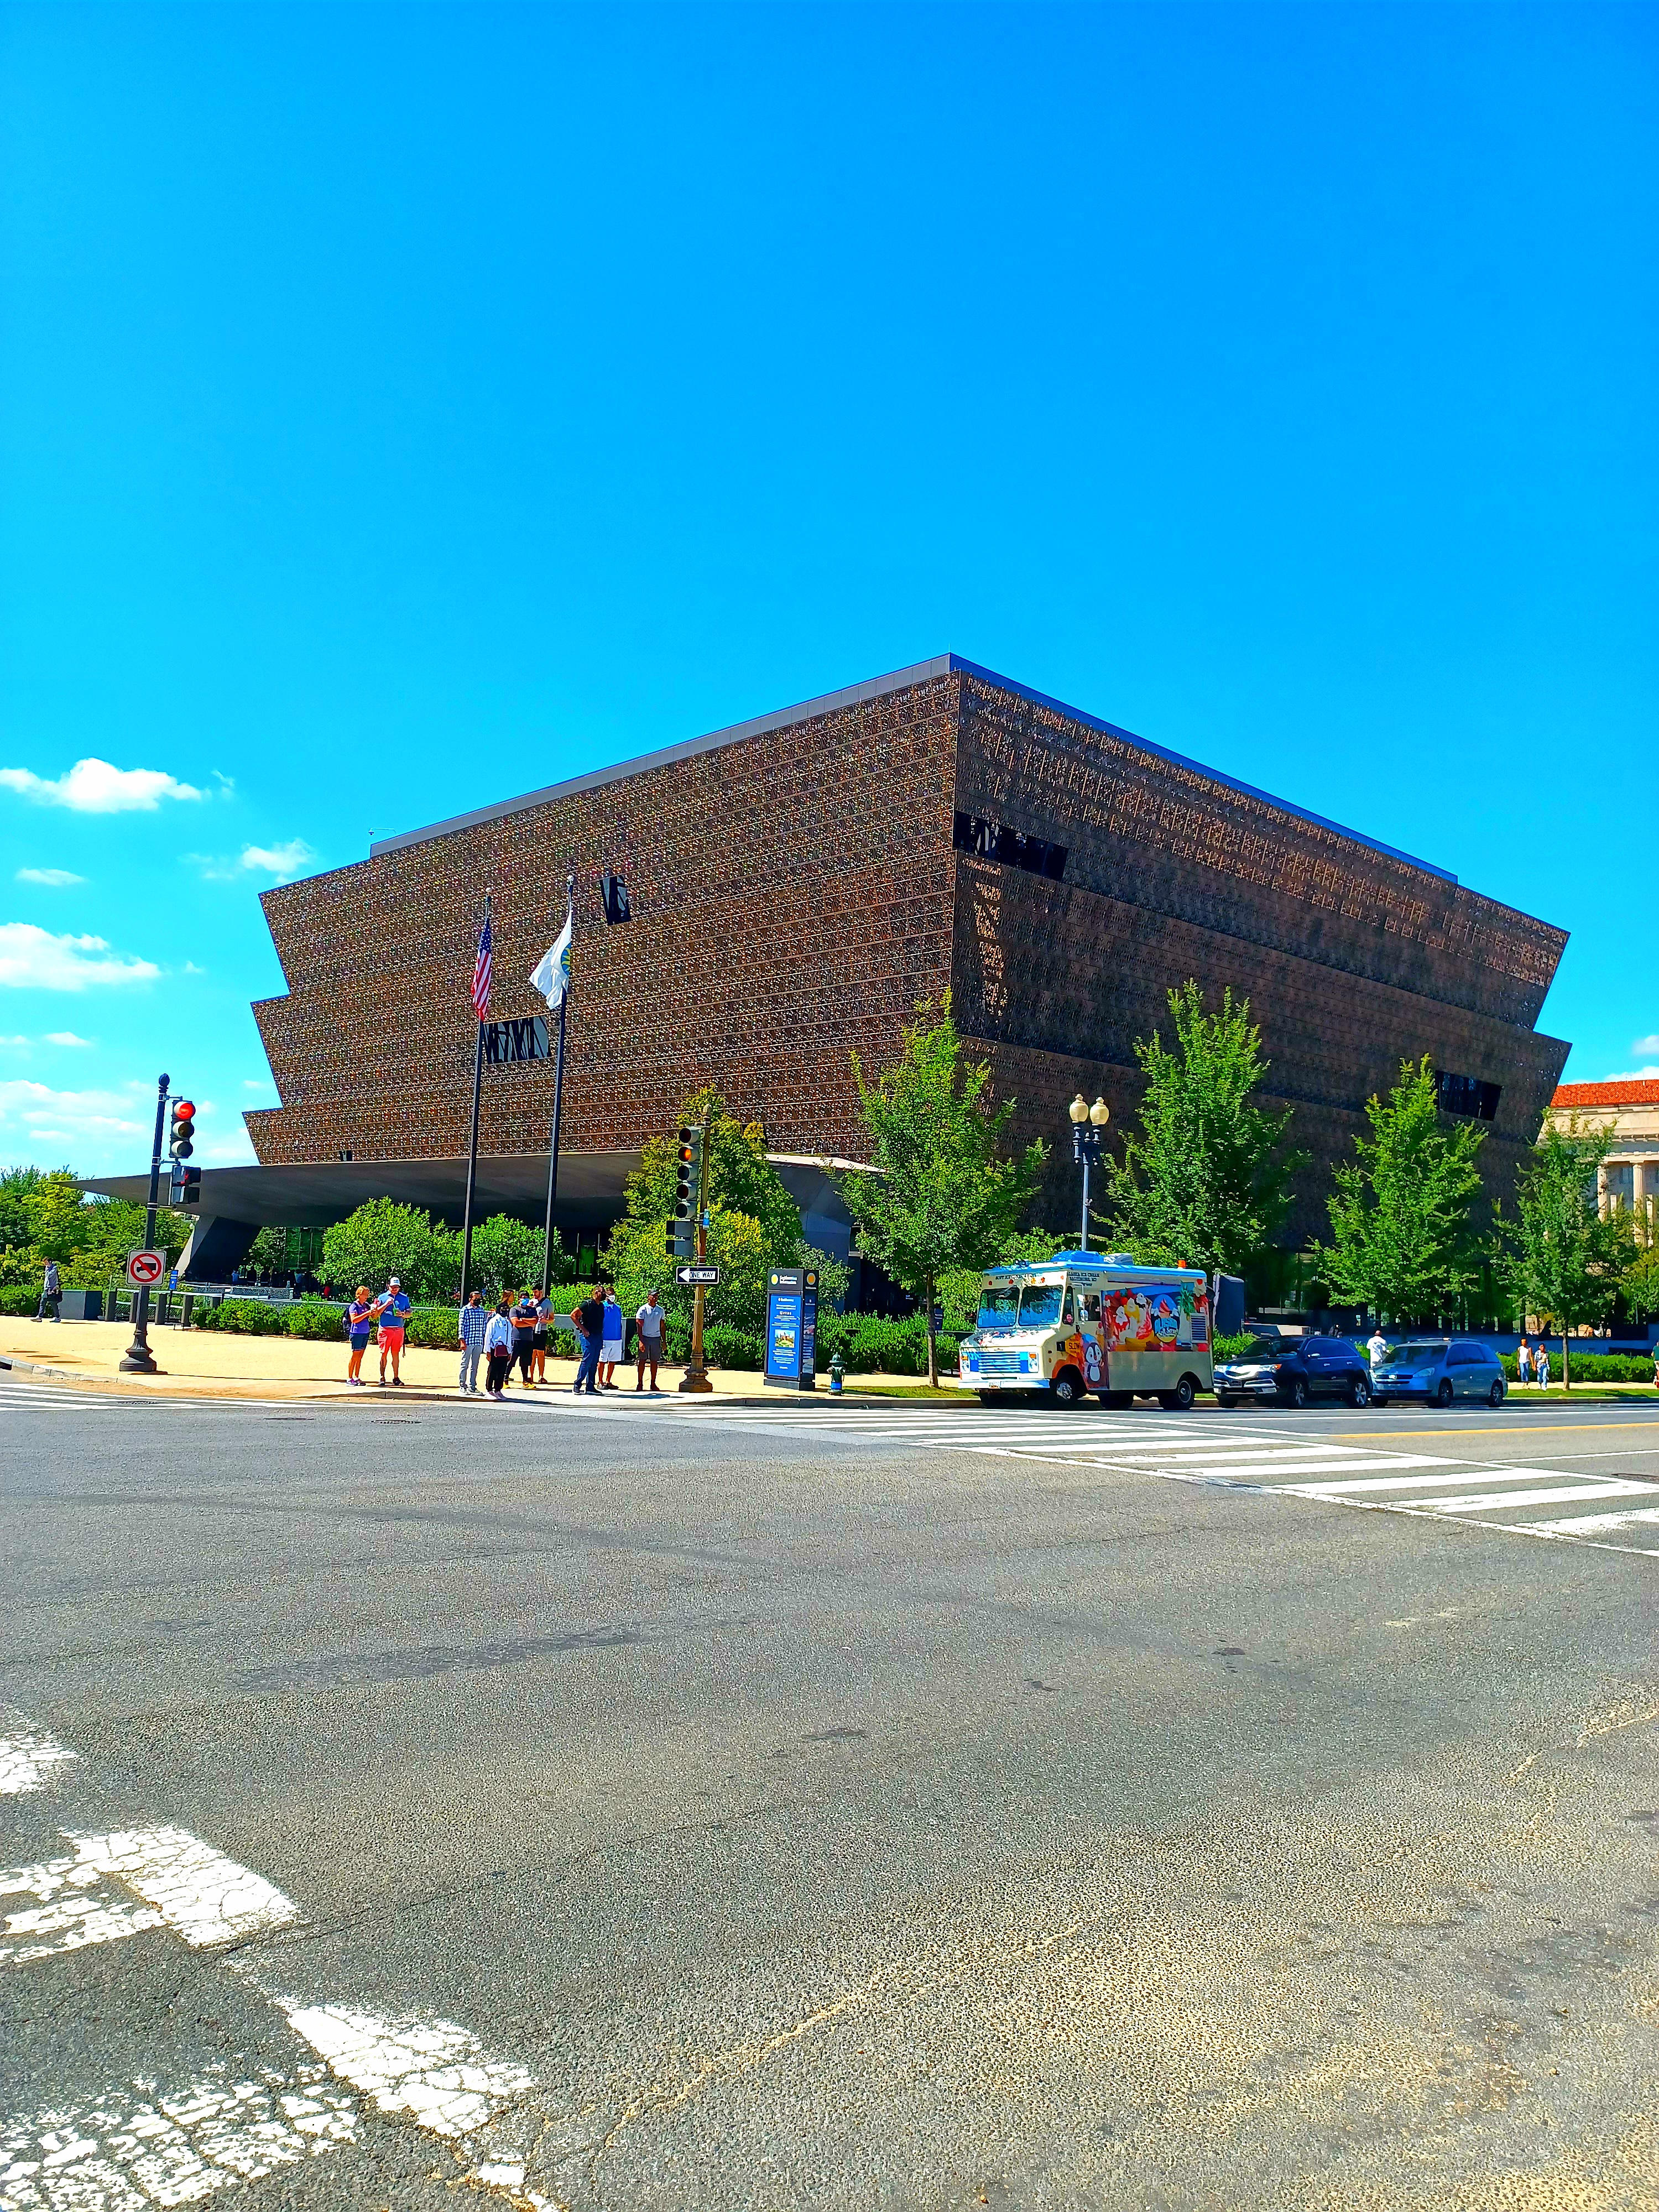 NMAAHC
A LABOR DAY WEEKEND IN THE DMV